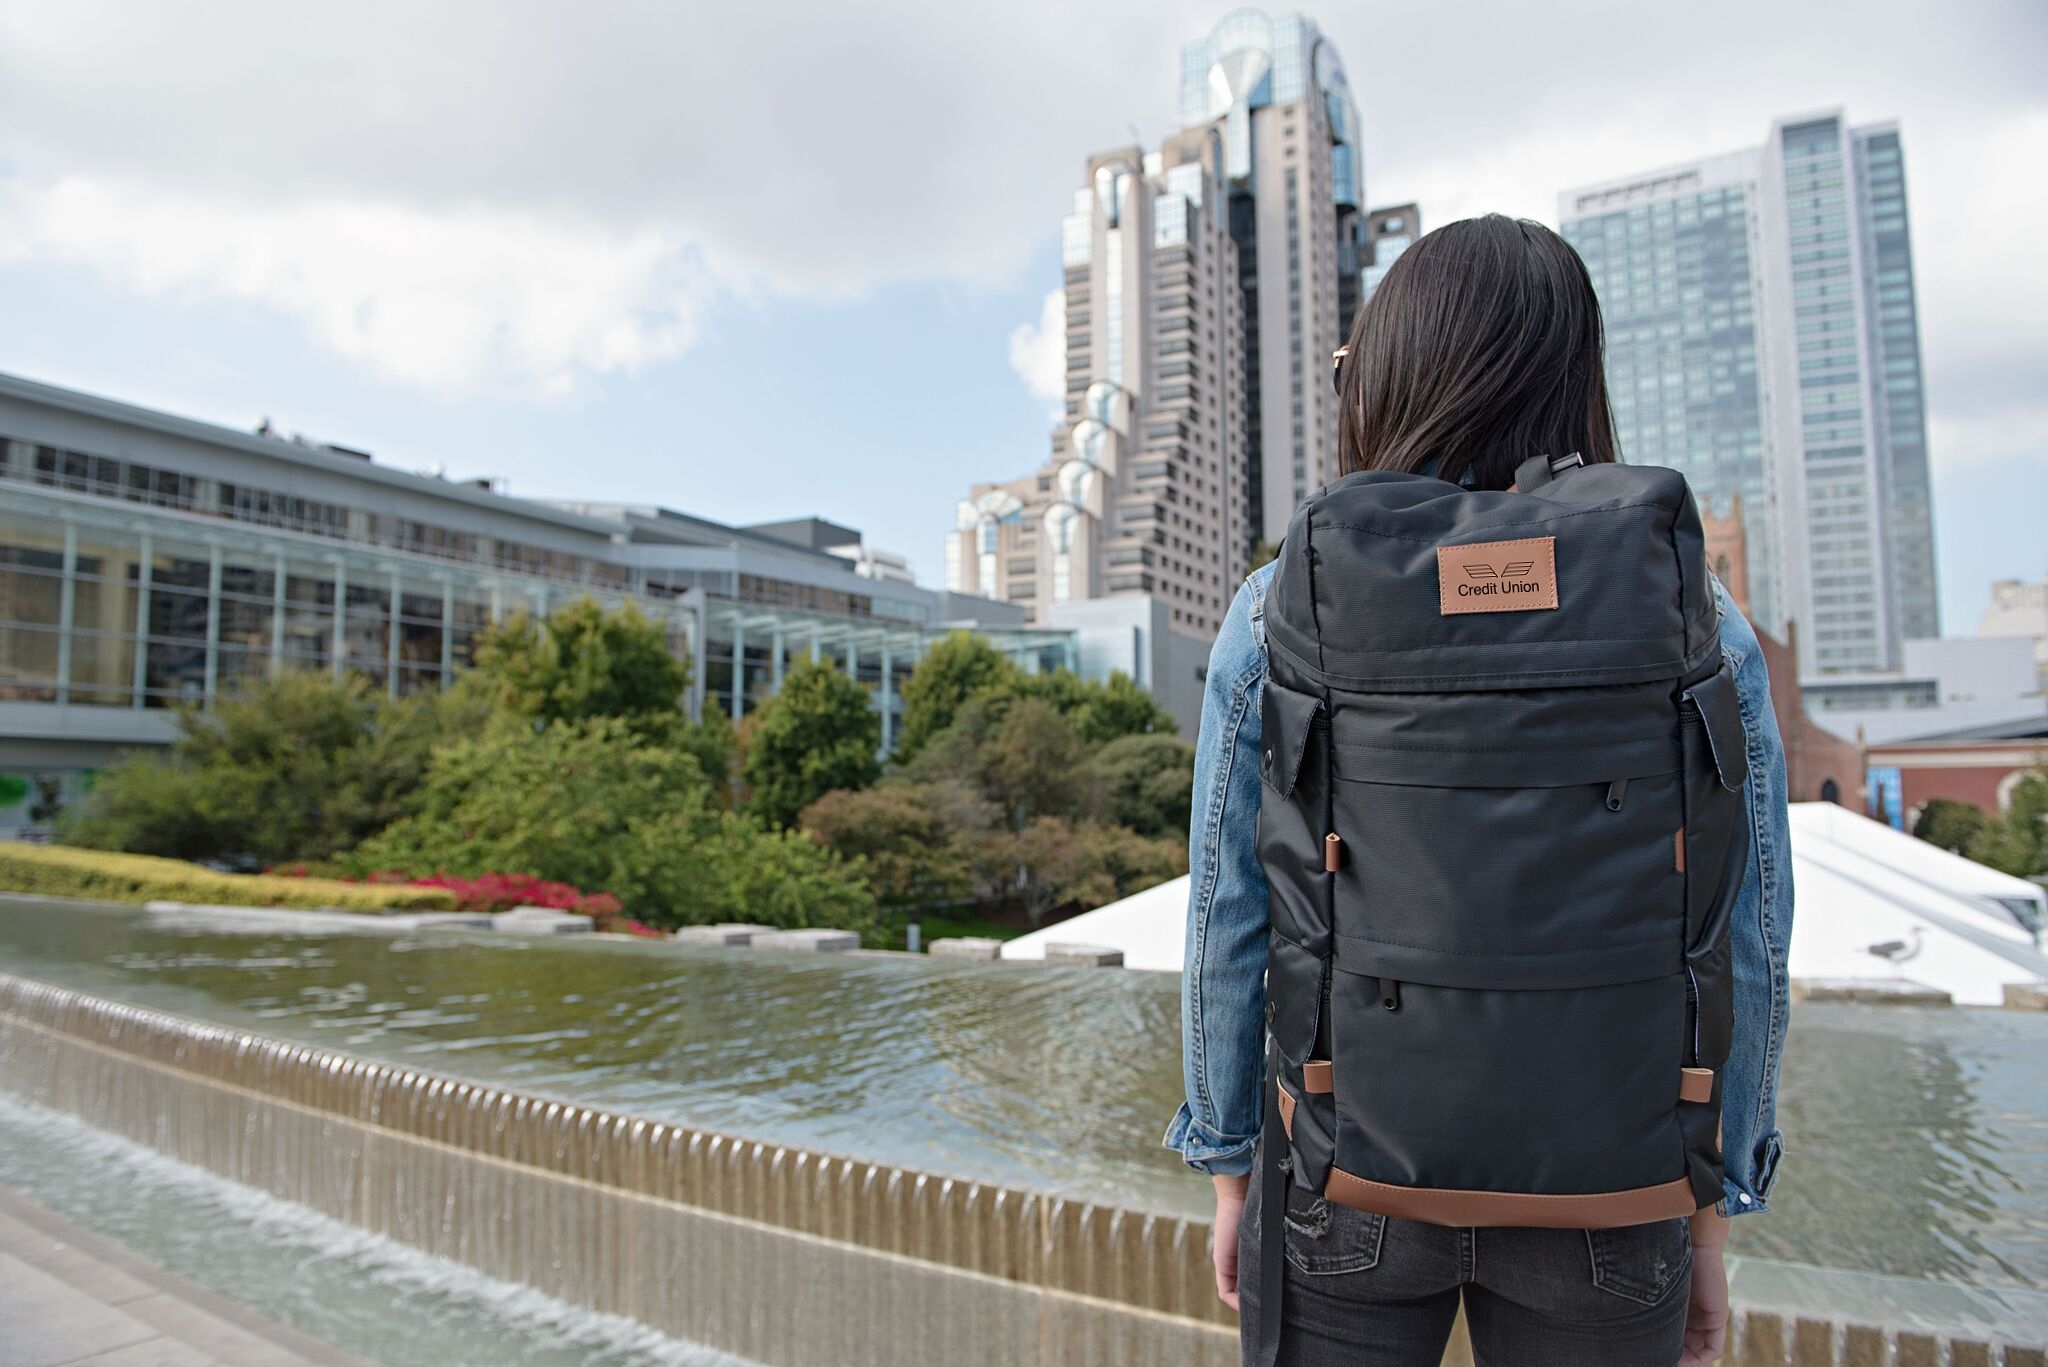 A woman overlooking a city, wearing branded backpack.